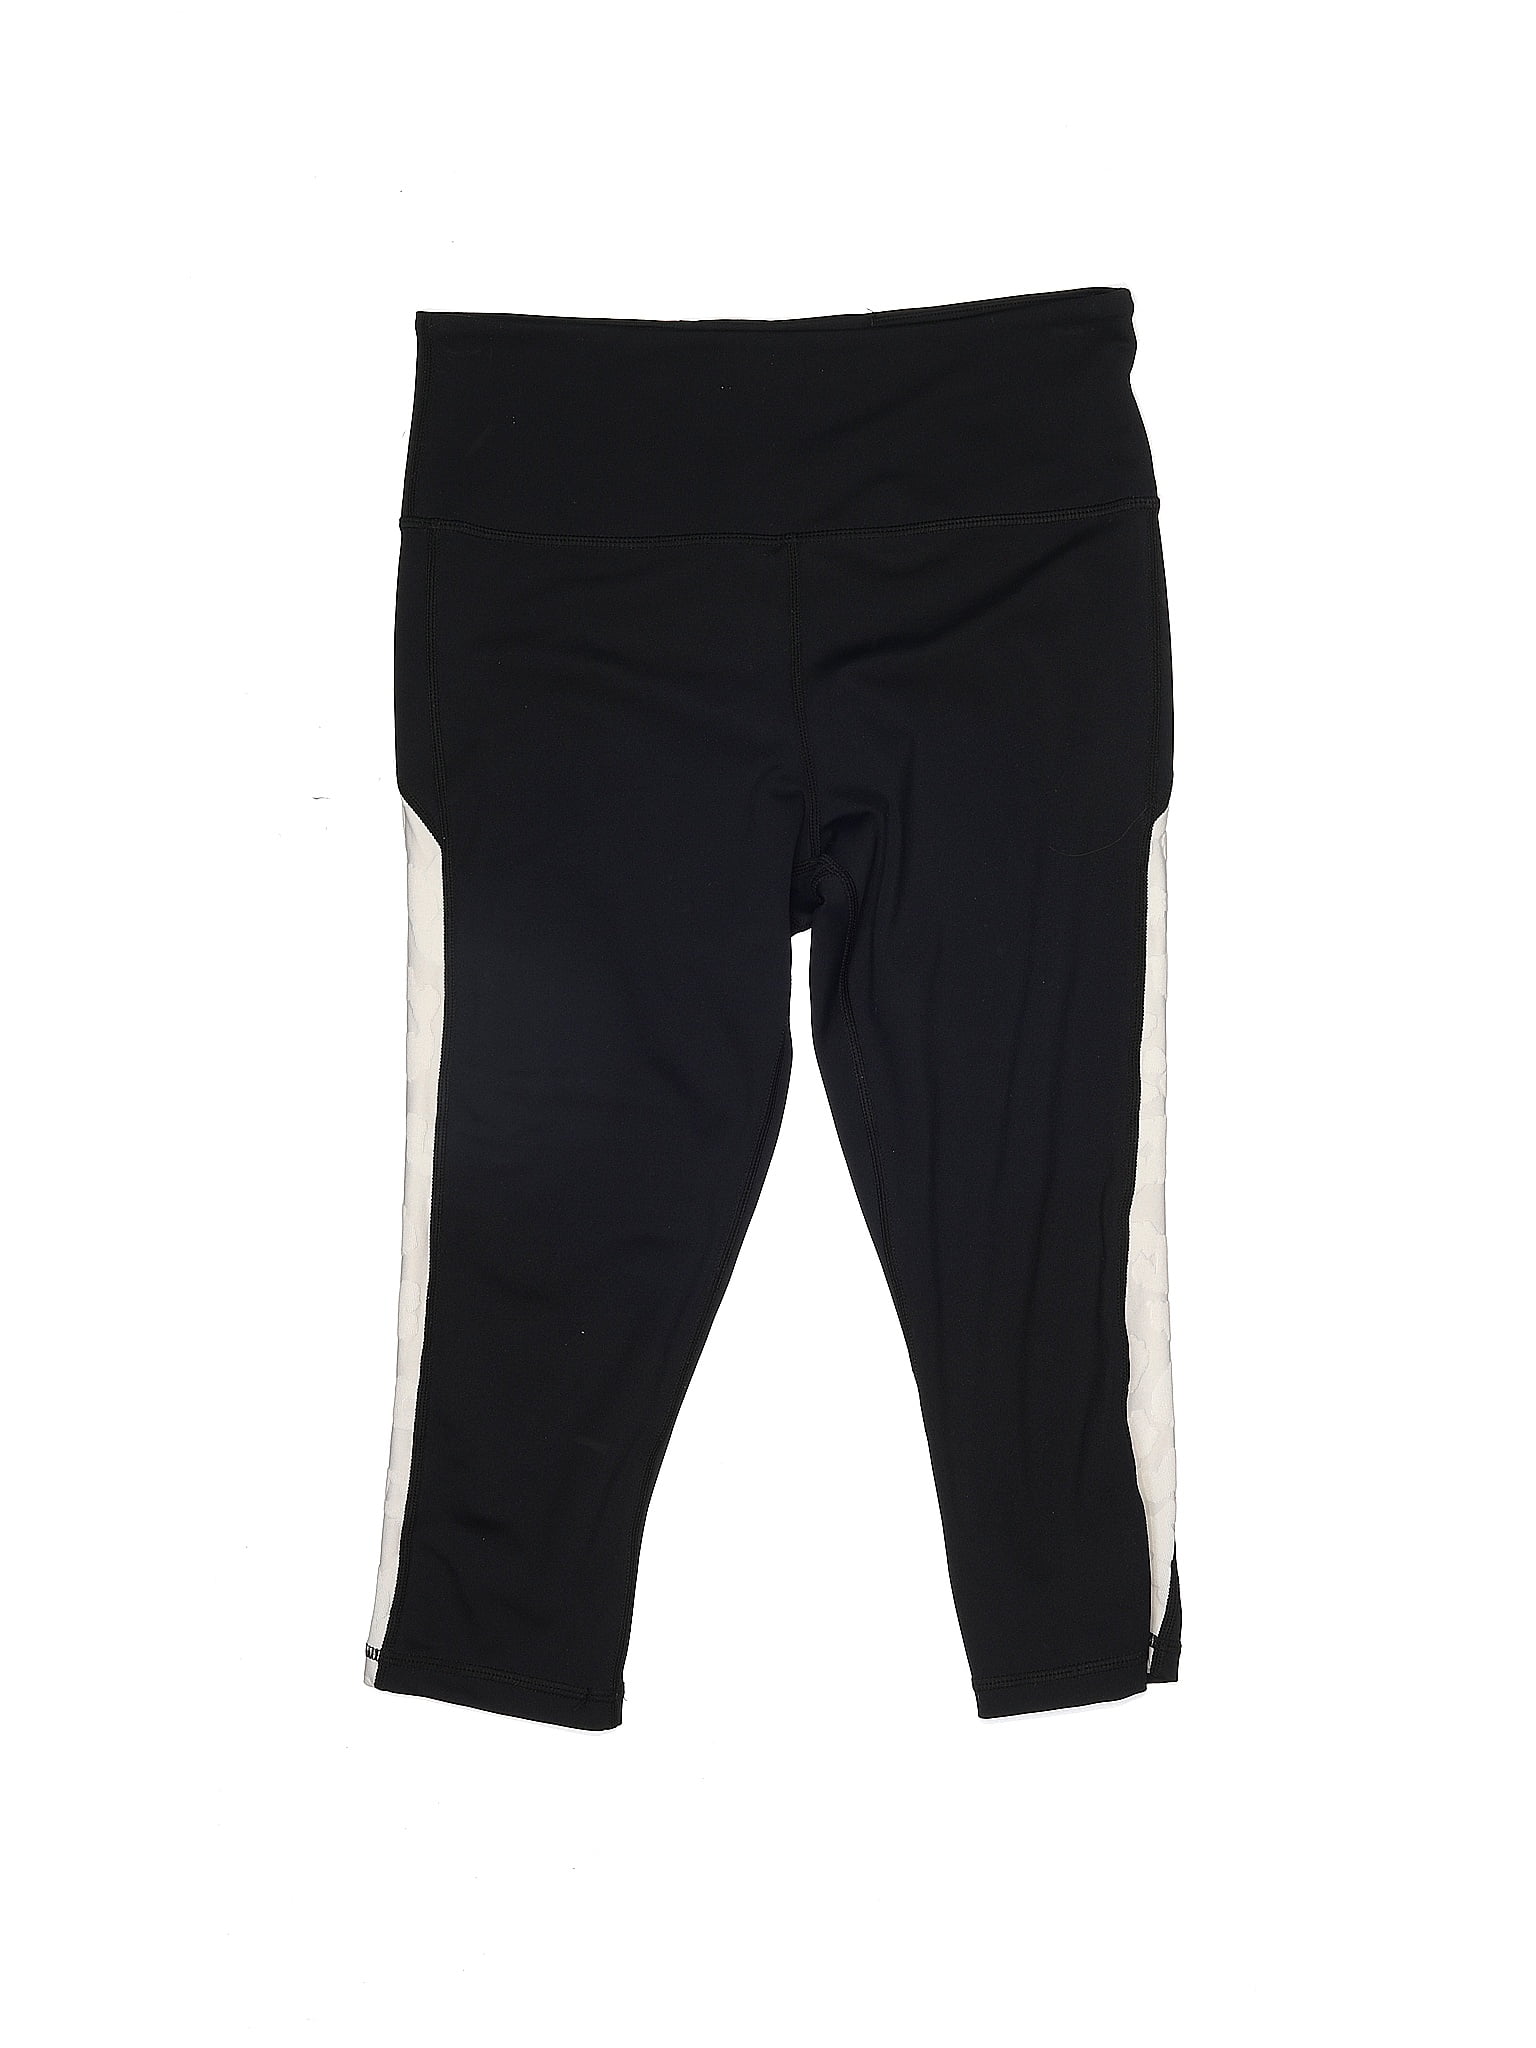 Zyia Active Black Bottoms for Girls Sizes (4+)